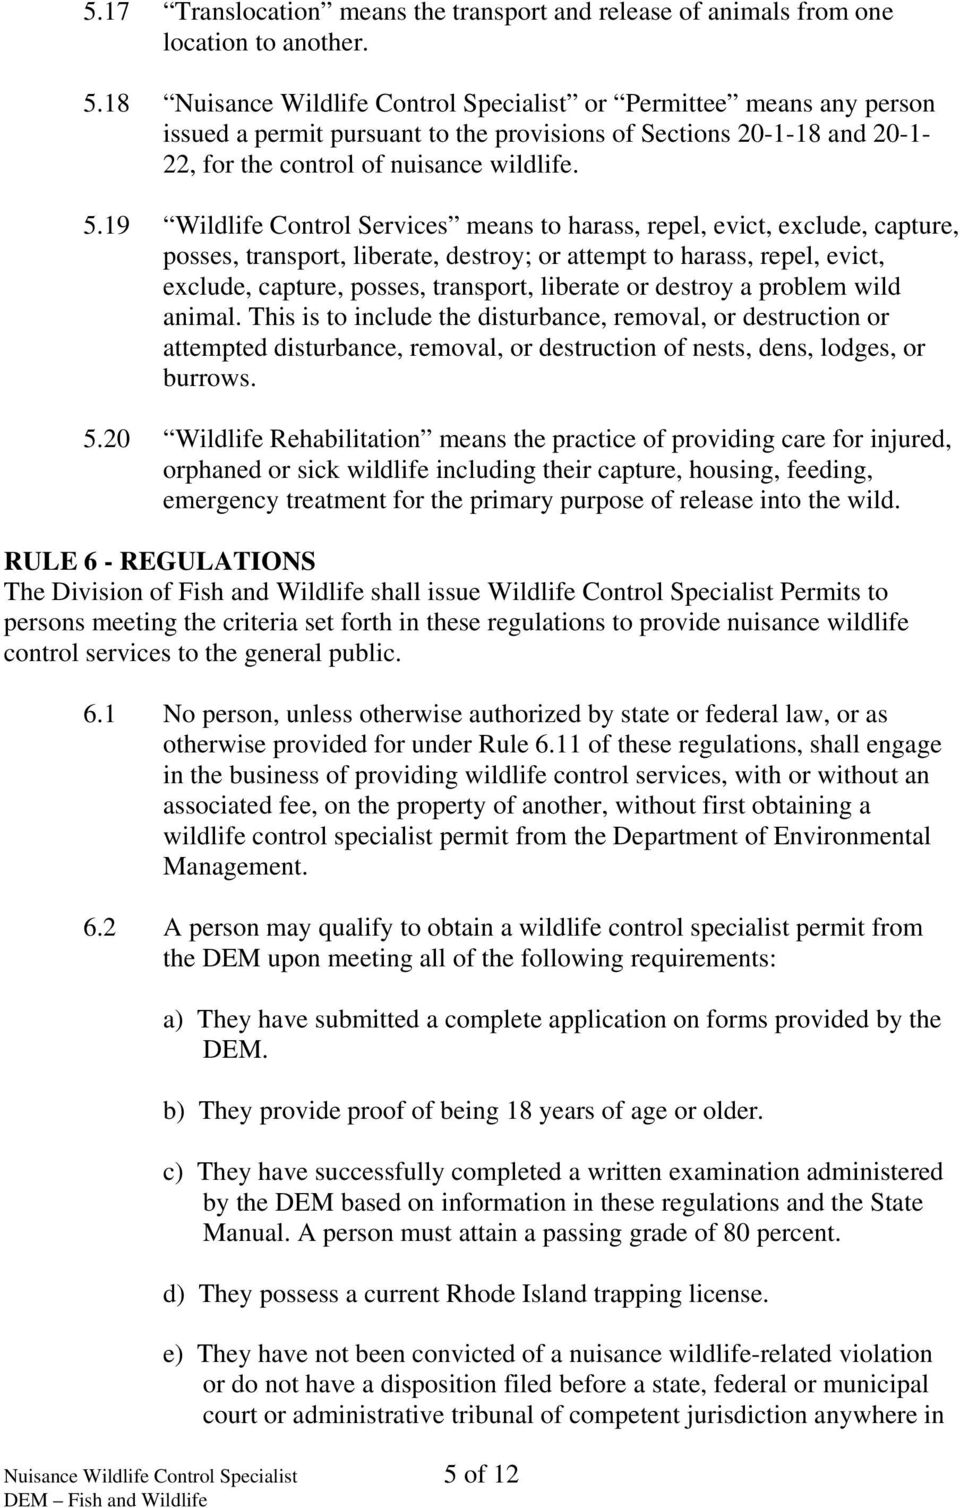 19 Wildlife Control Services means to harass, repel, evict, exclude, capture, posses, transport, liberate, destroy; or attempt to harass, repel, evict, exclude, capture, posses, transport, liberate